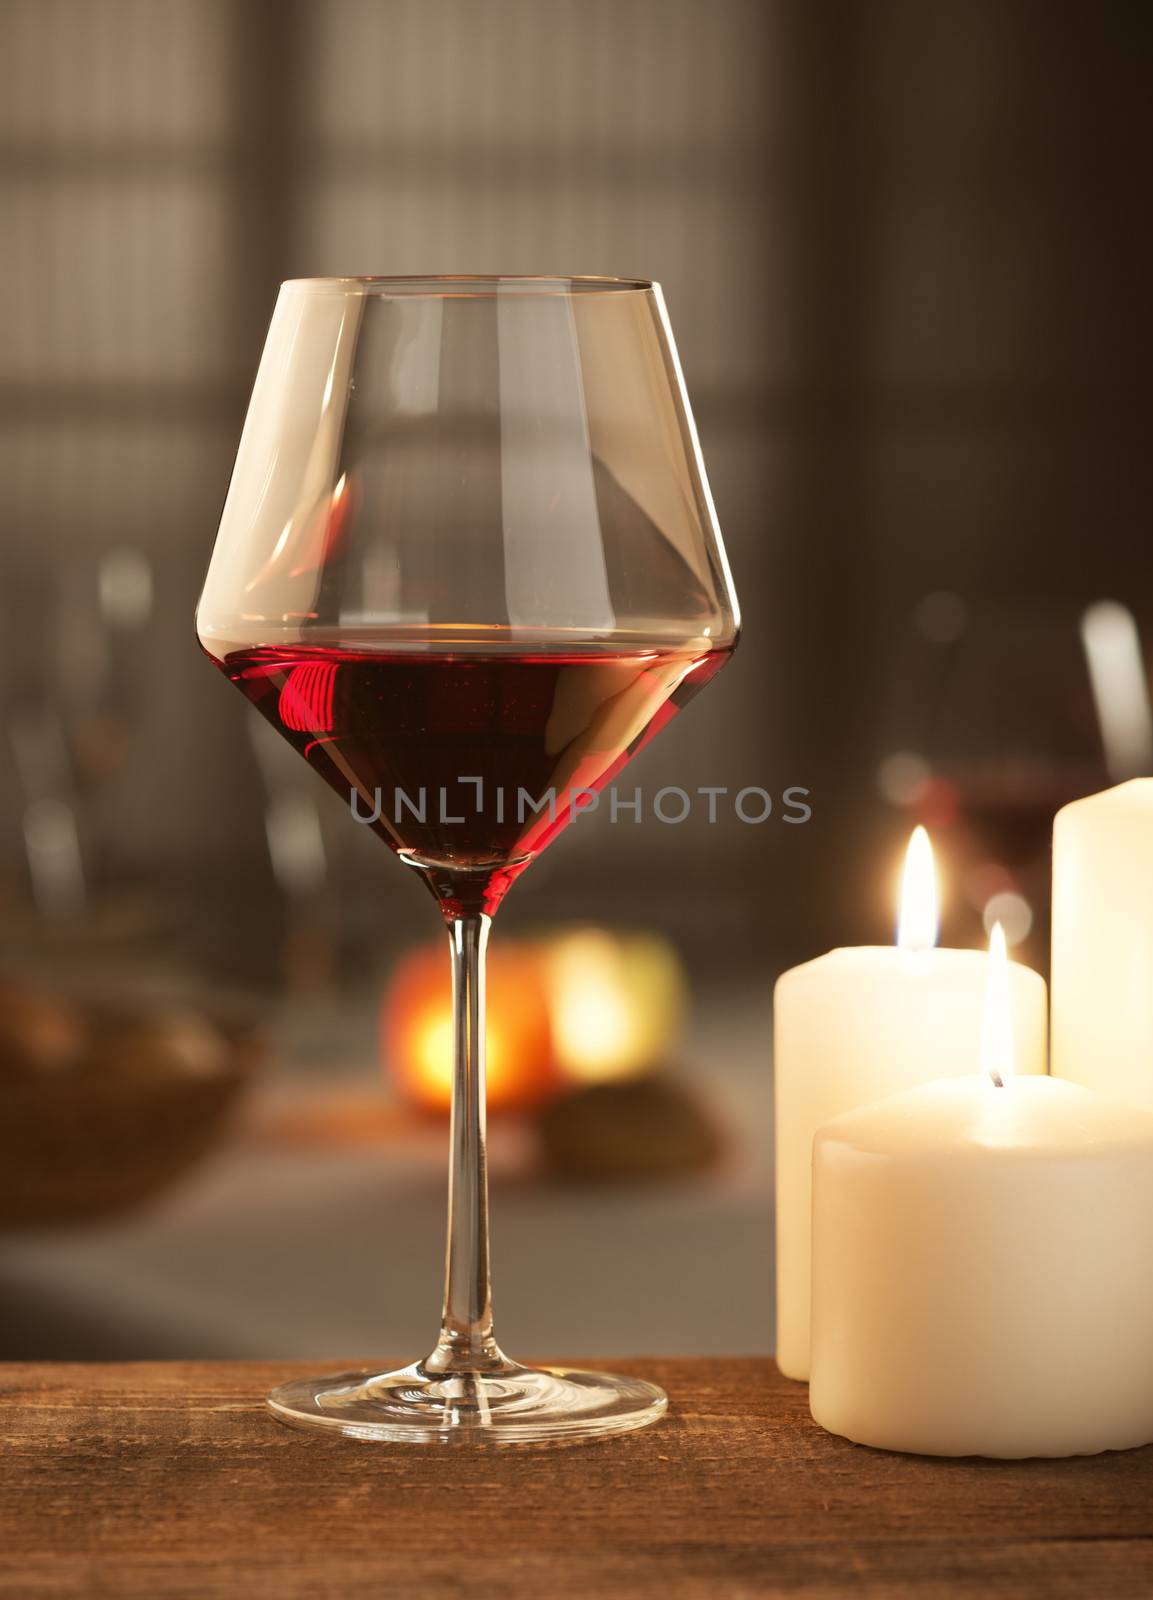 Red wine glass with candlelight and restaurant on background.